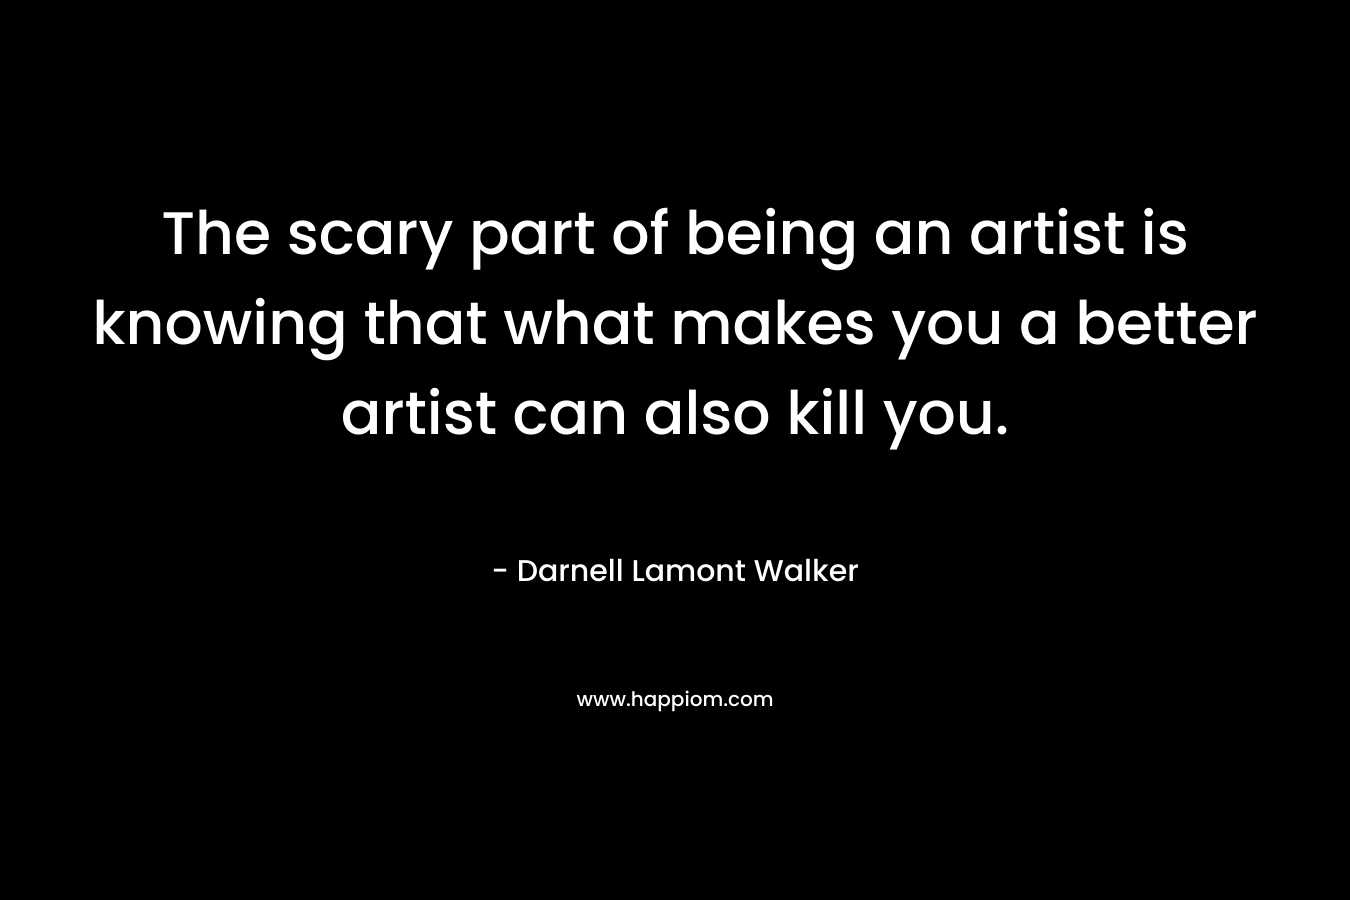 The scary part of being an artist is knowing that what makes you a better artist can also kill you.